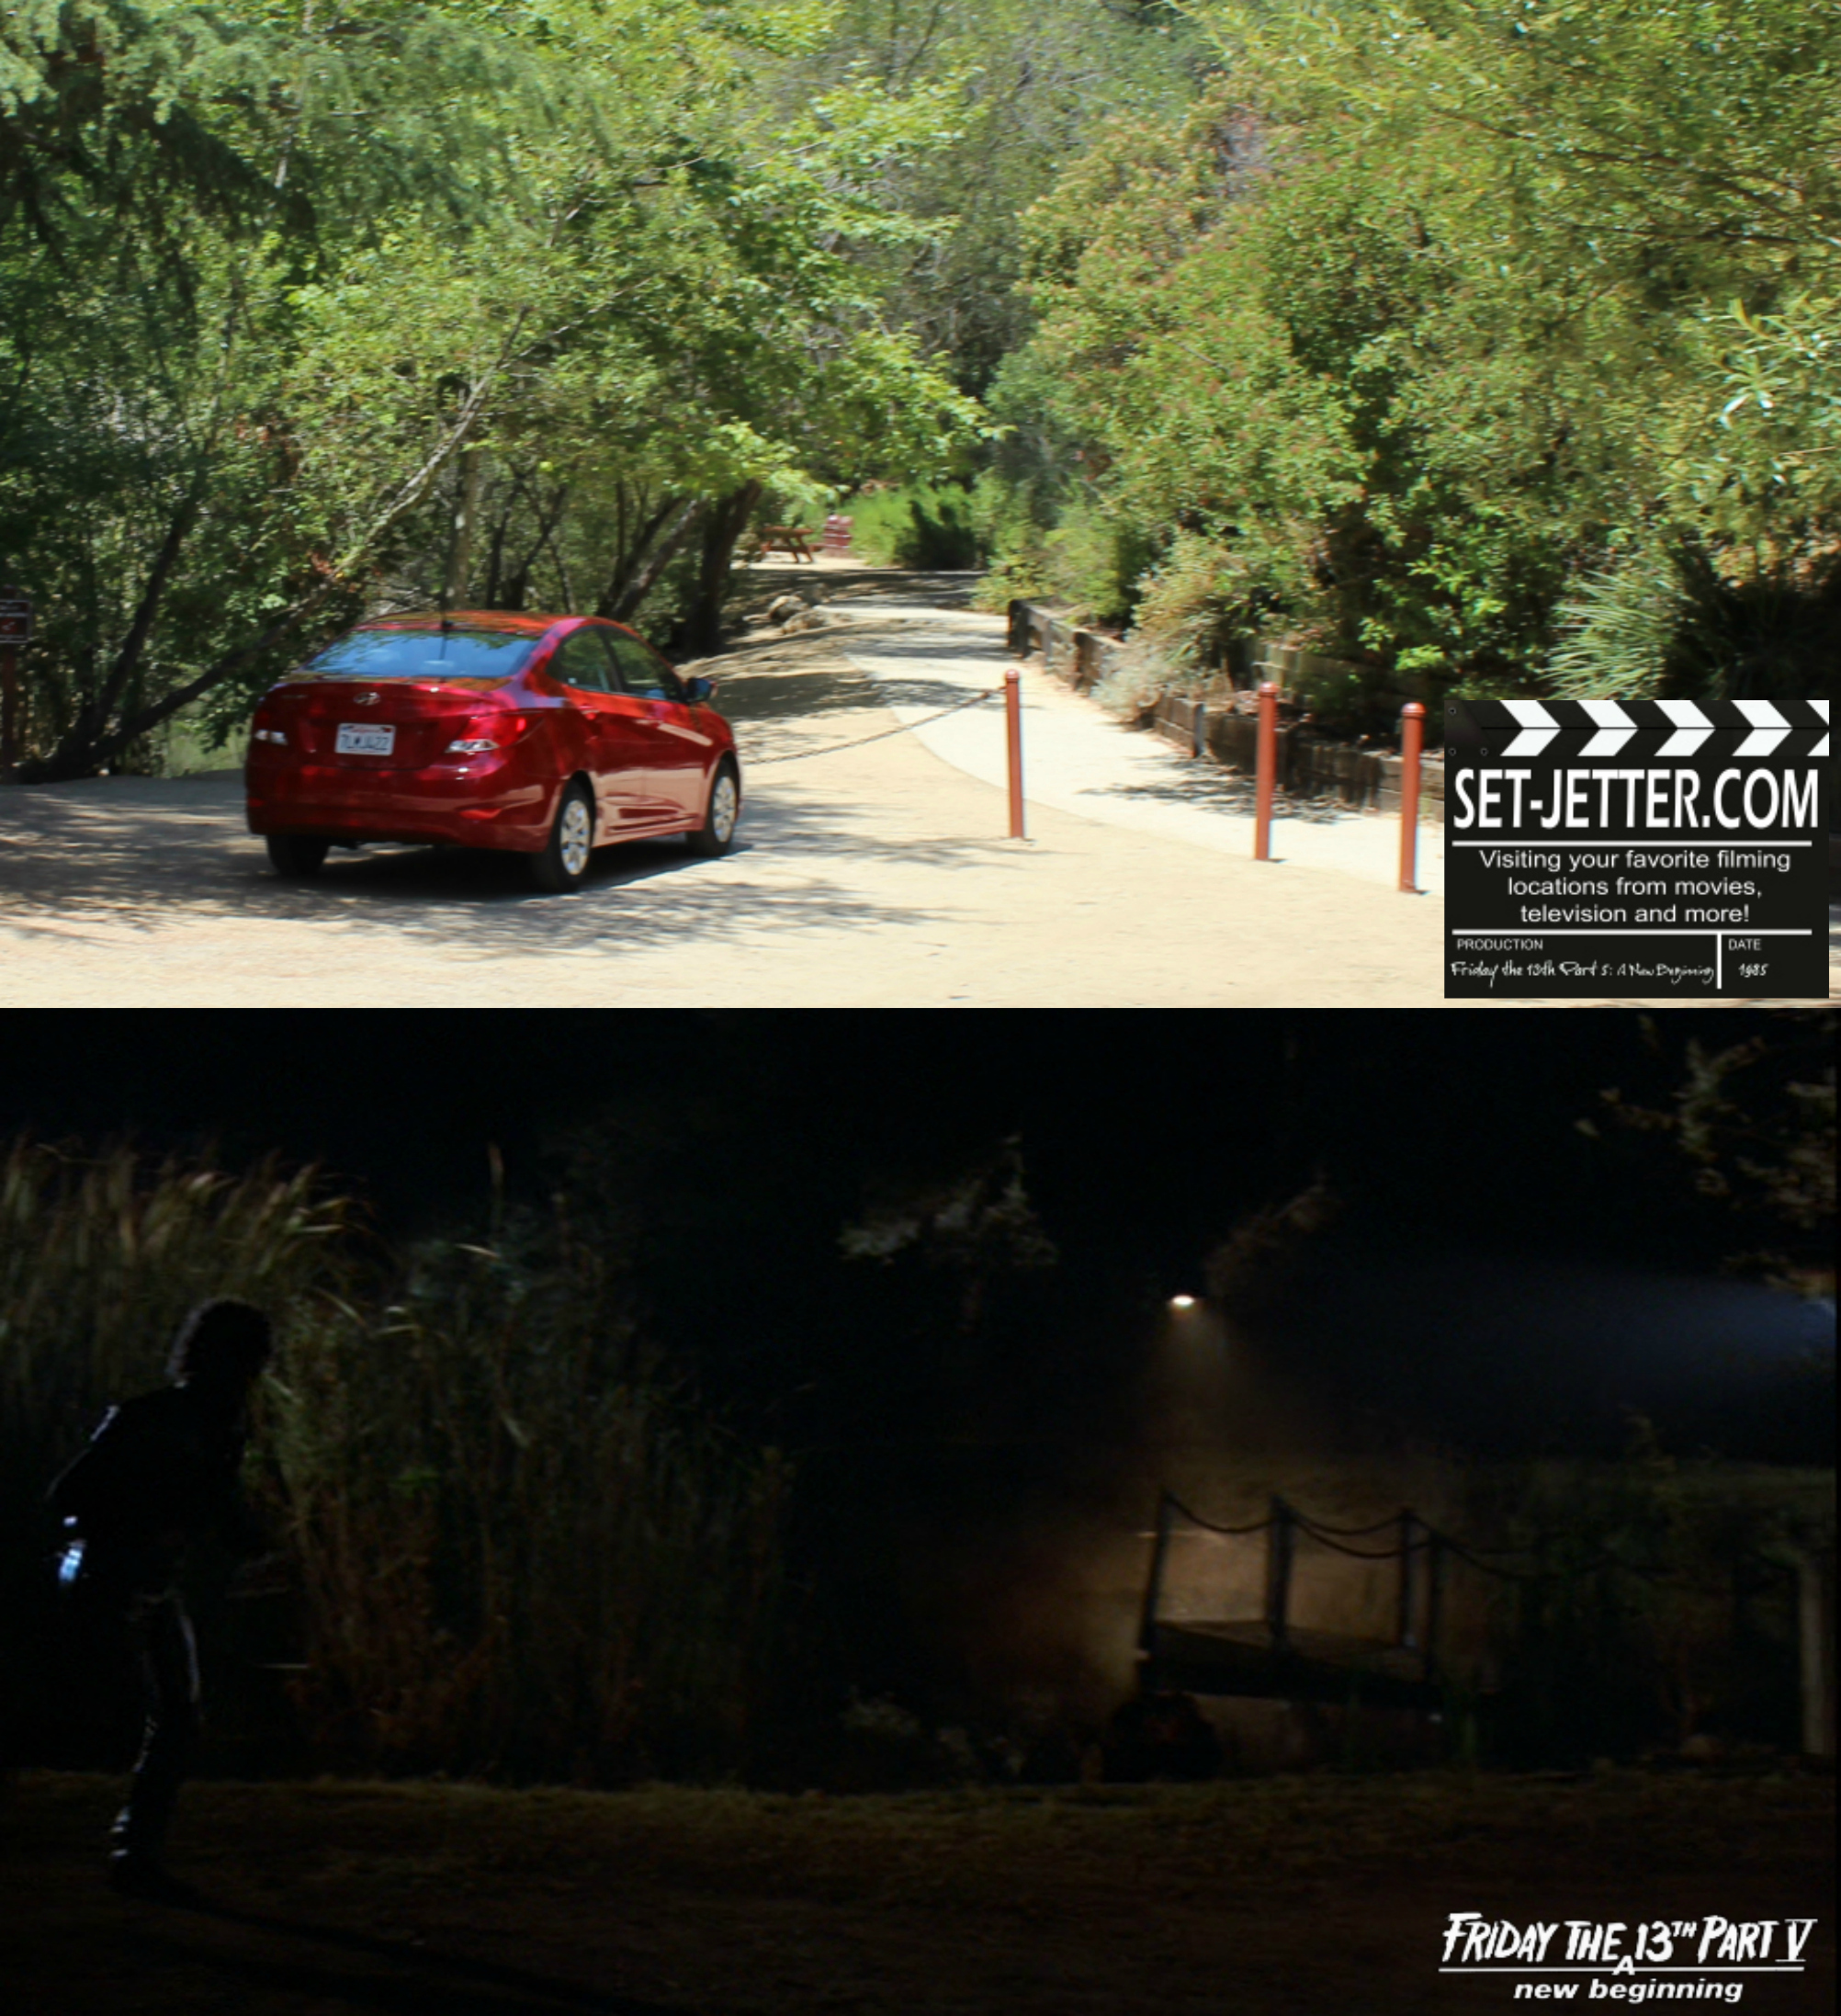 Friday the 13th Part V comparison 44.jpg